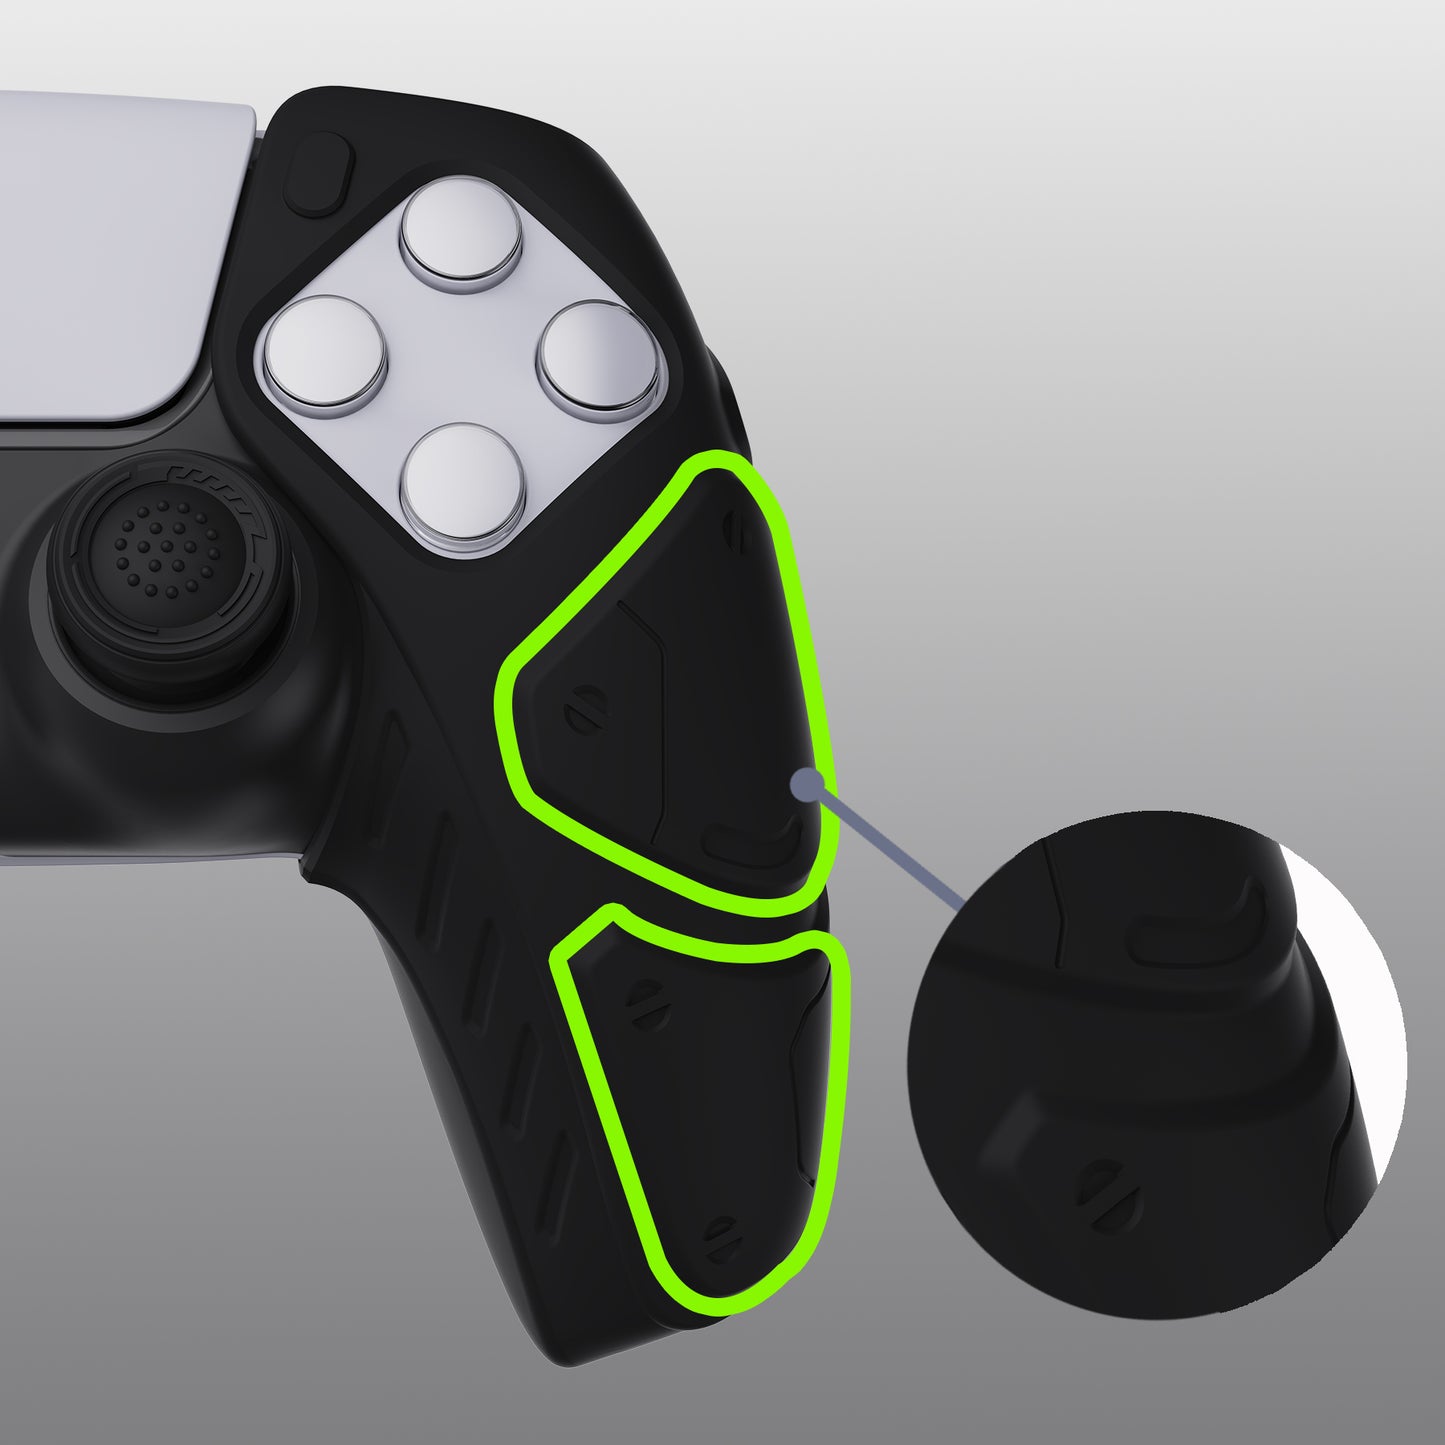 PlayVital Mecha Edition Anti-Slip Silicone Cover Skin with Thumb Grip Caps for PS5 Wireless Controller - Compatible with Charging Station - Black - JGPF001 PlayVital